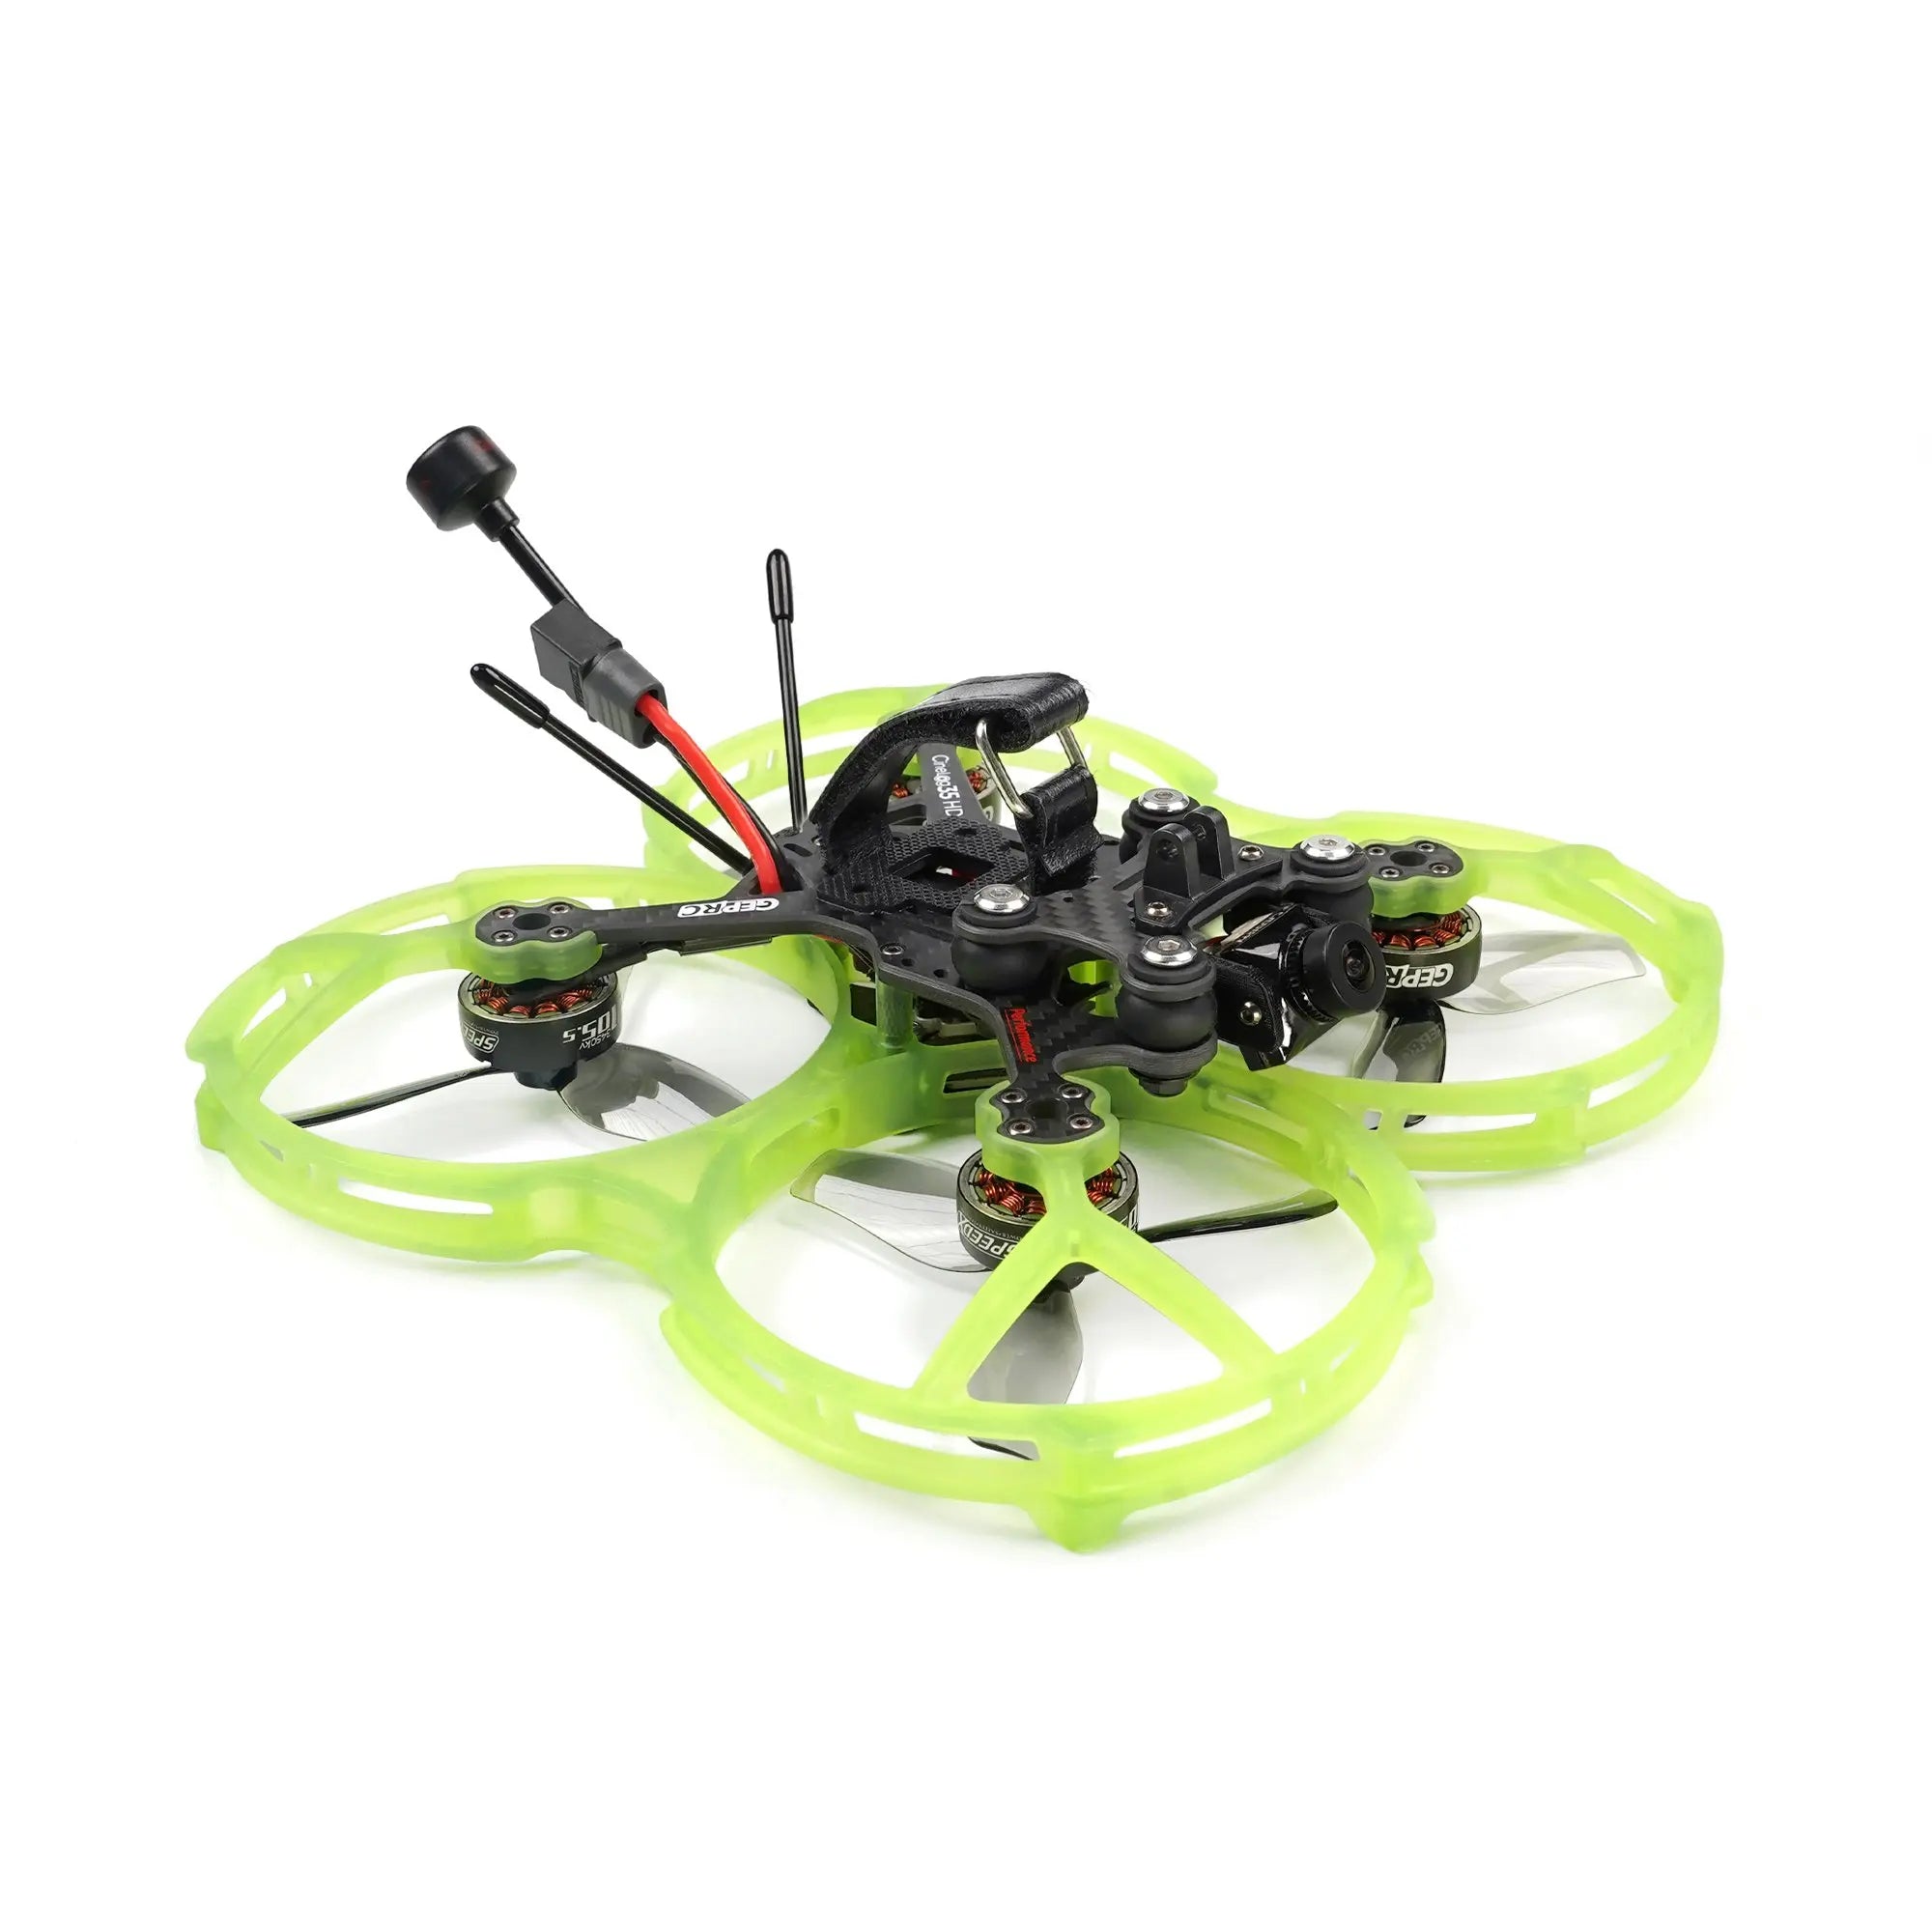 GEPRC CineLog35 Cinewhoop FPV Drone, You can even Freestyle with GEPRC Naked Hero 8 Camera .